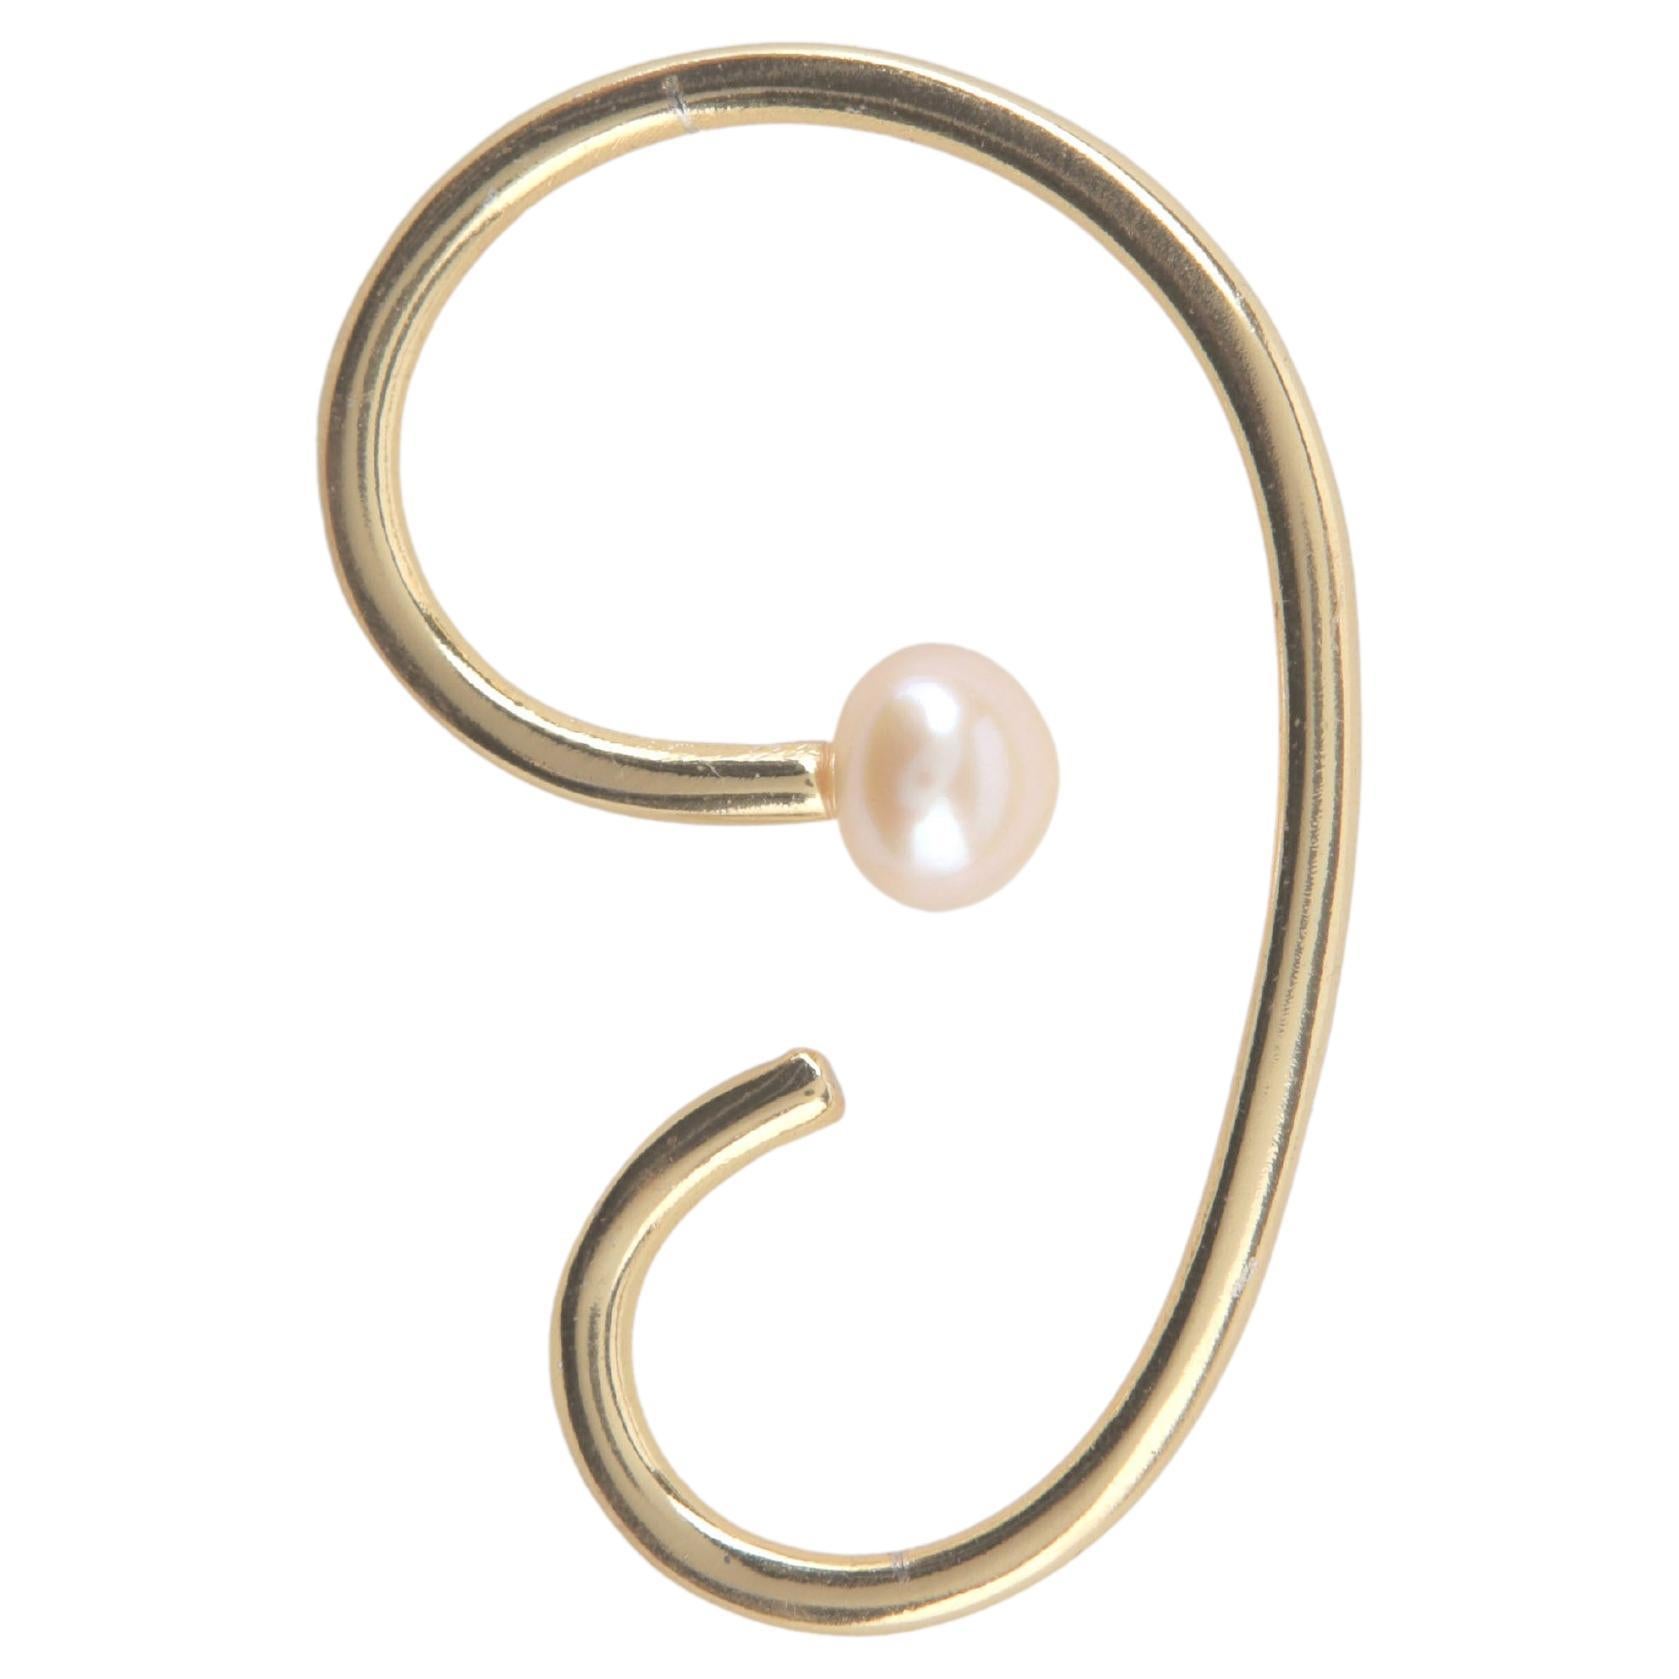 chanel pearl and diamond brooch pin